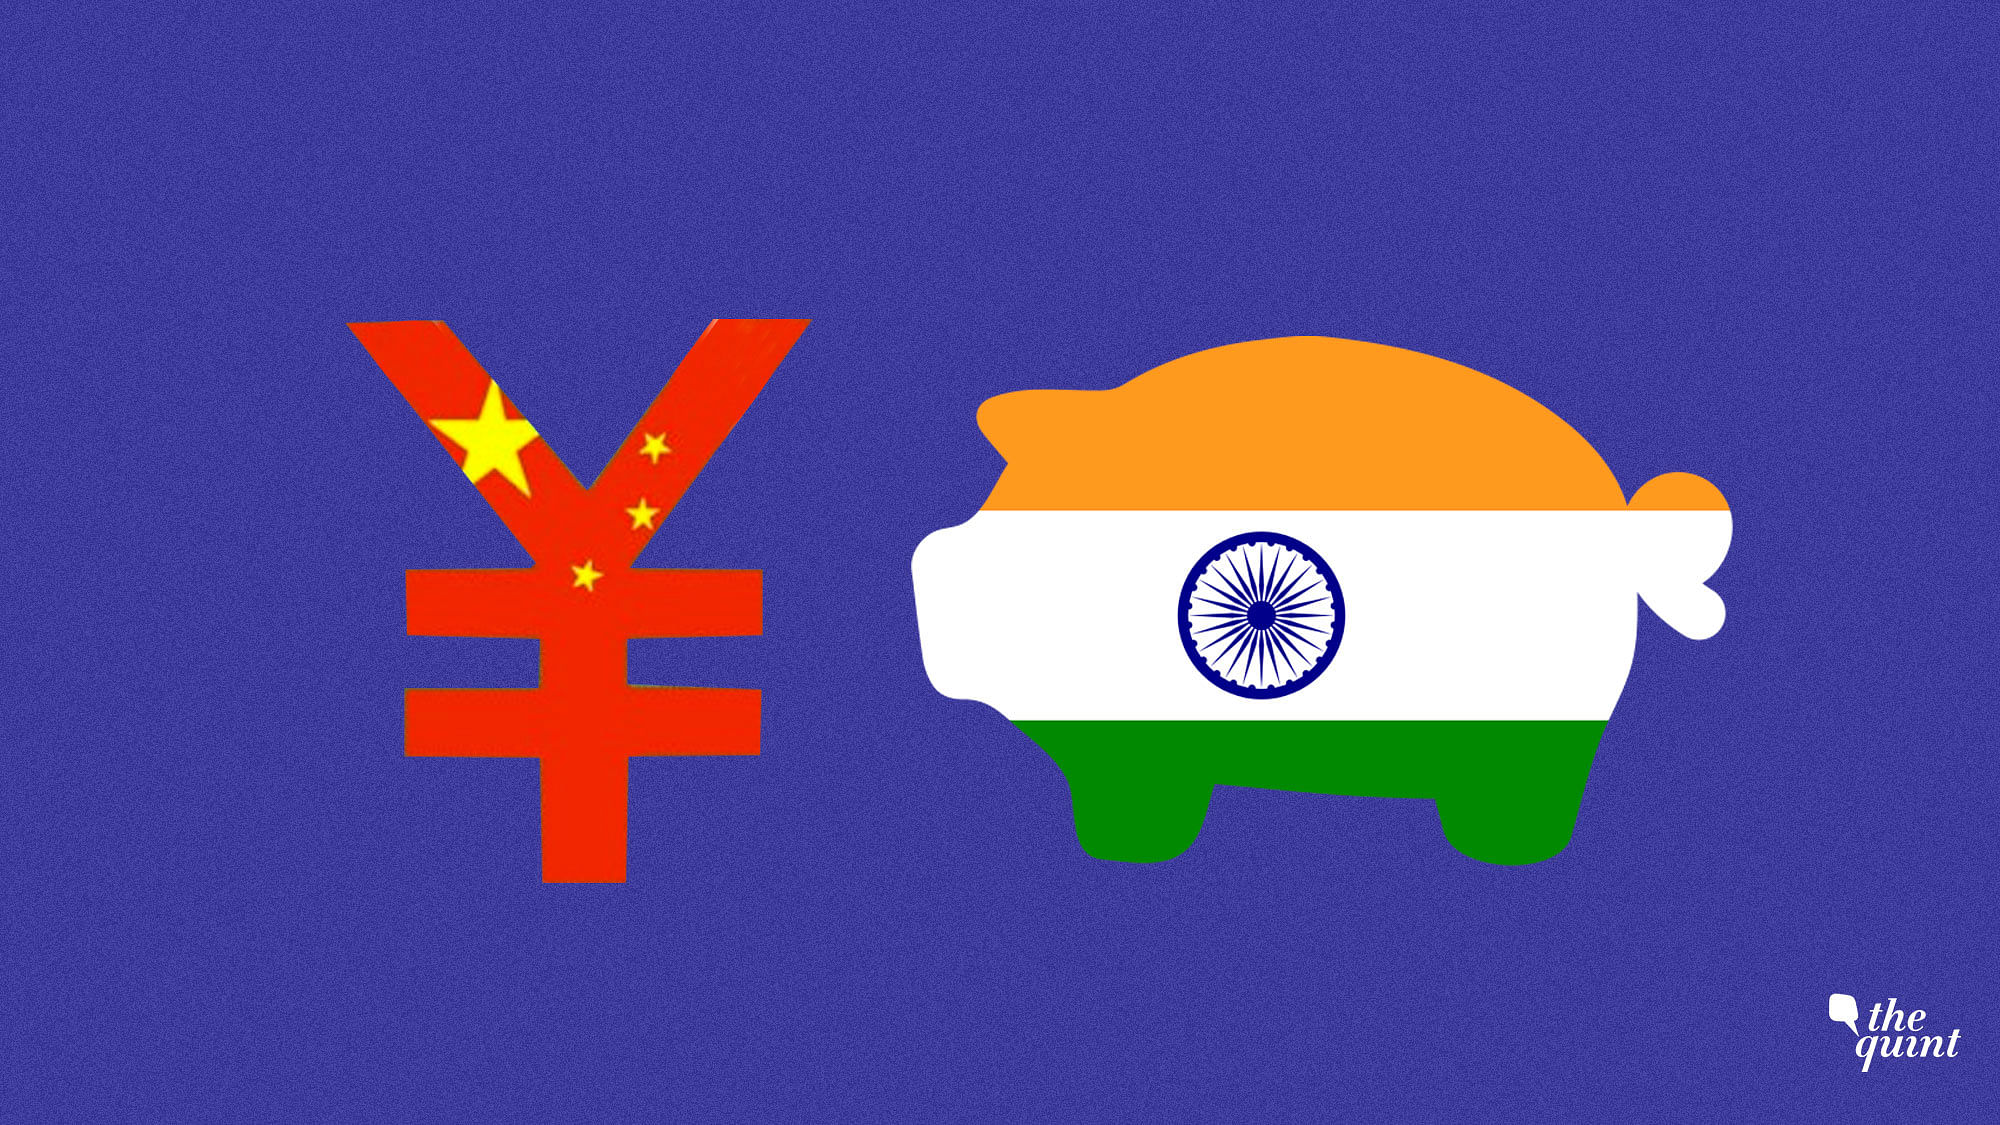 Image of the Chinese currency, Yen, and the Indian flag on a piggy bank, used for representational purposes.